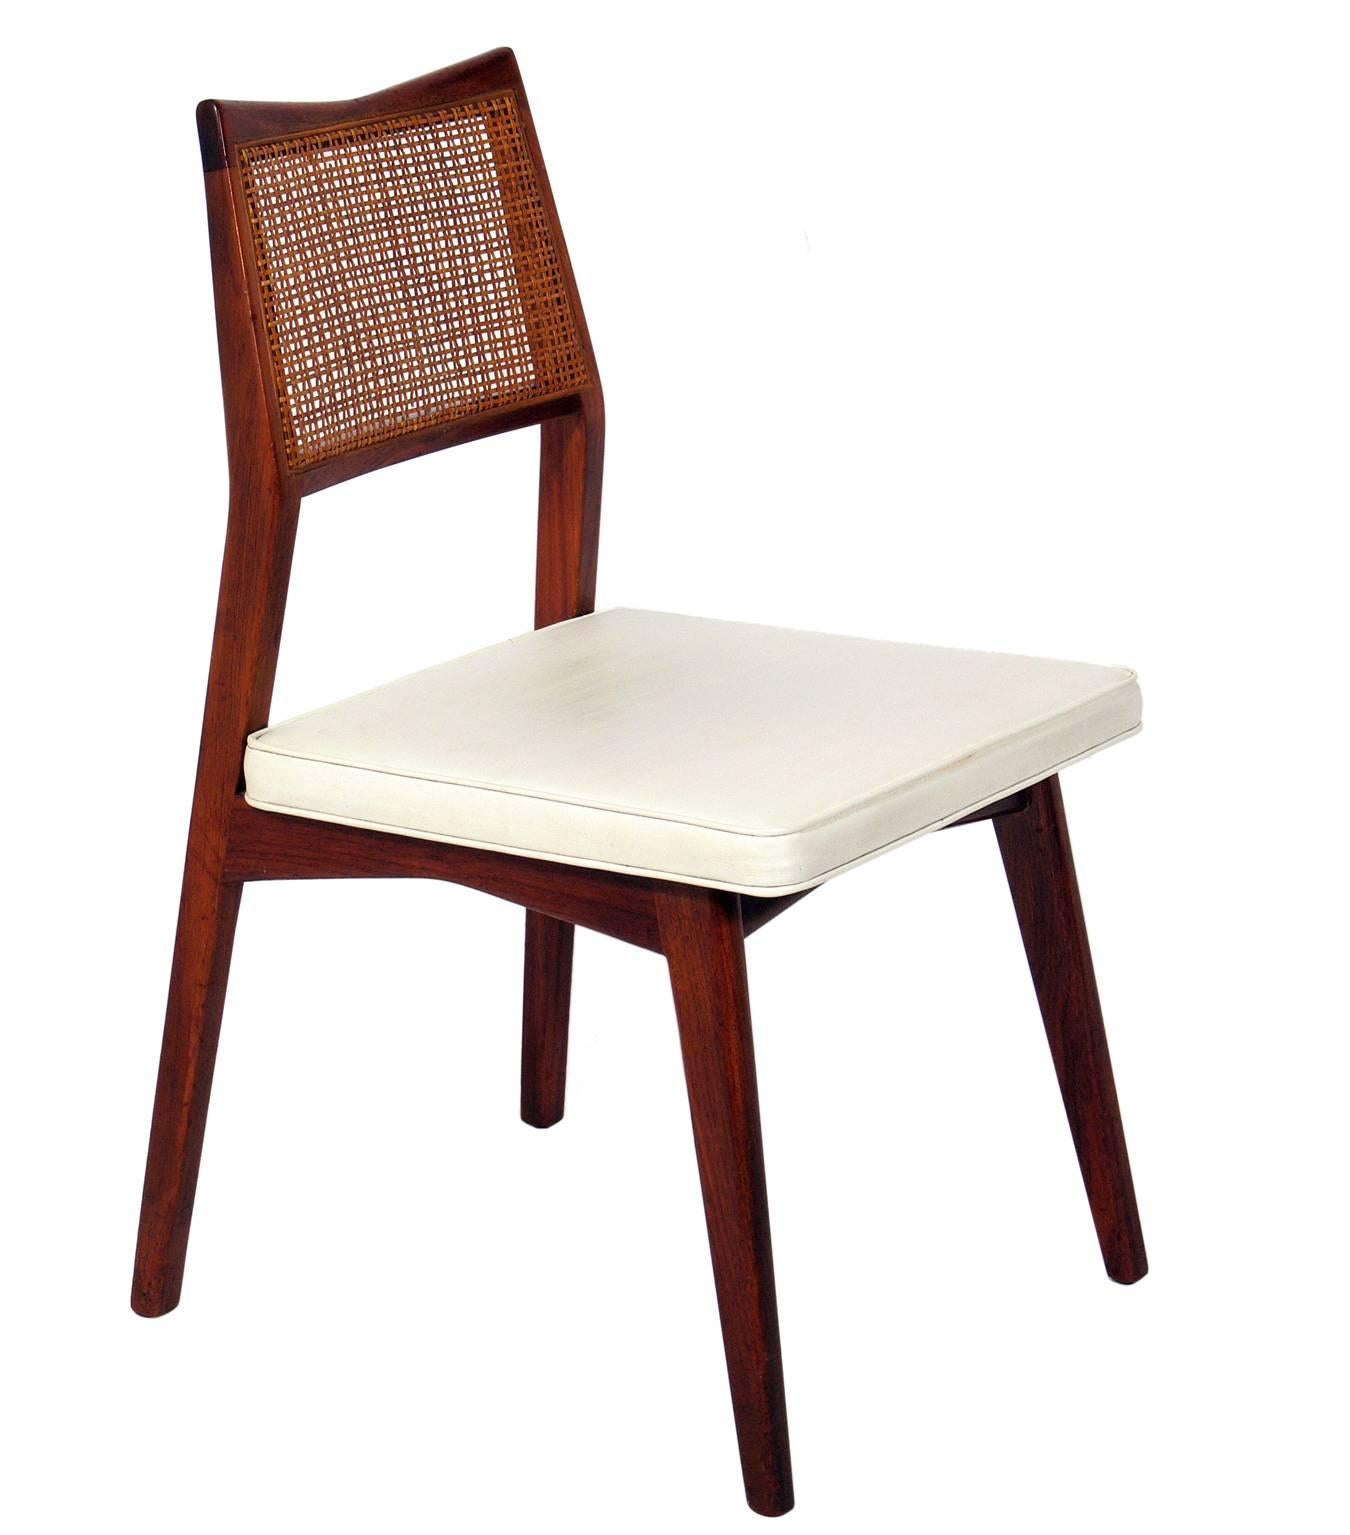 Set of four caned back midcentury dining chairs, attributed to Jens Risom, American, circa 1960s. They have the Danish modern styling that Risom was influenced by, and many of his signature details such as the angled backrests. The original vinyl